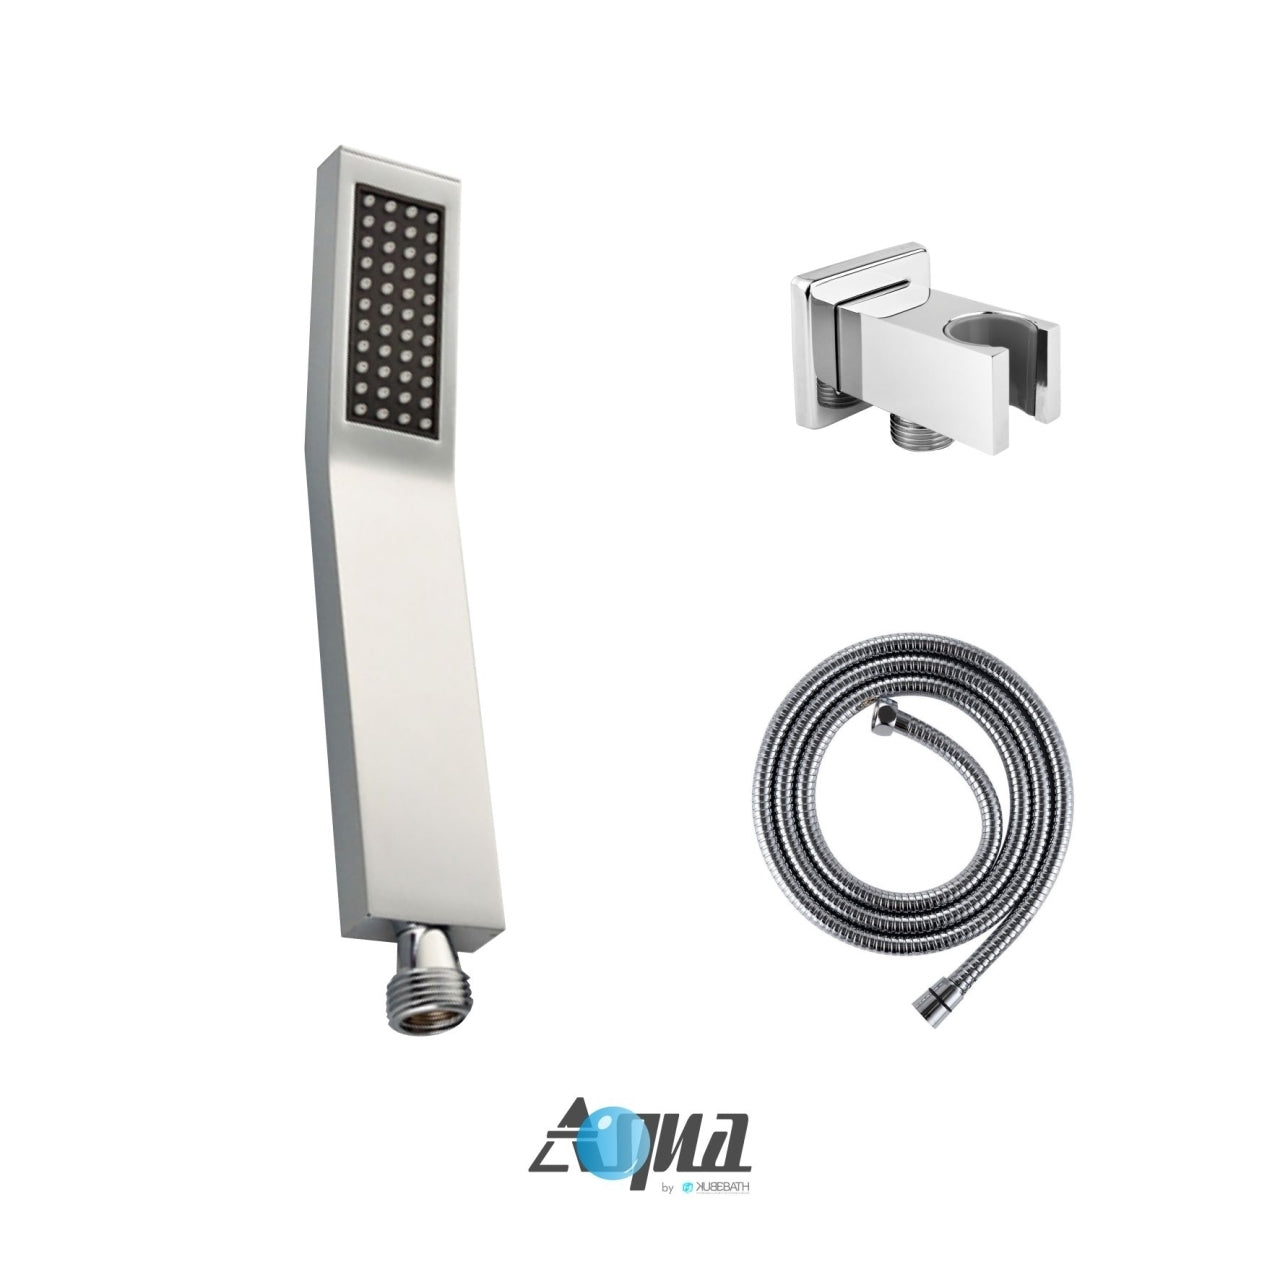 Kube Bath Aqua Piazza Shower Set With 8" Ceiling Mount Square Rain Shower, Handheld and 4 Body Jets Chrome